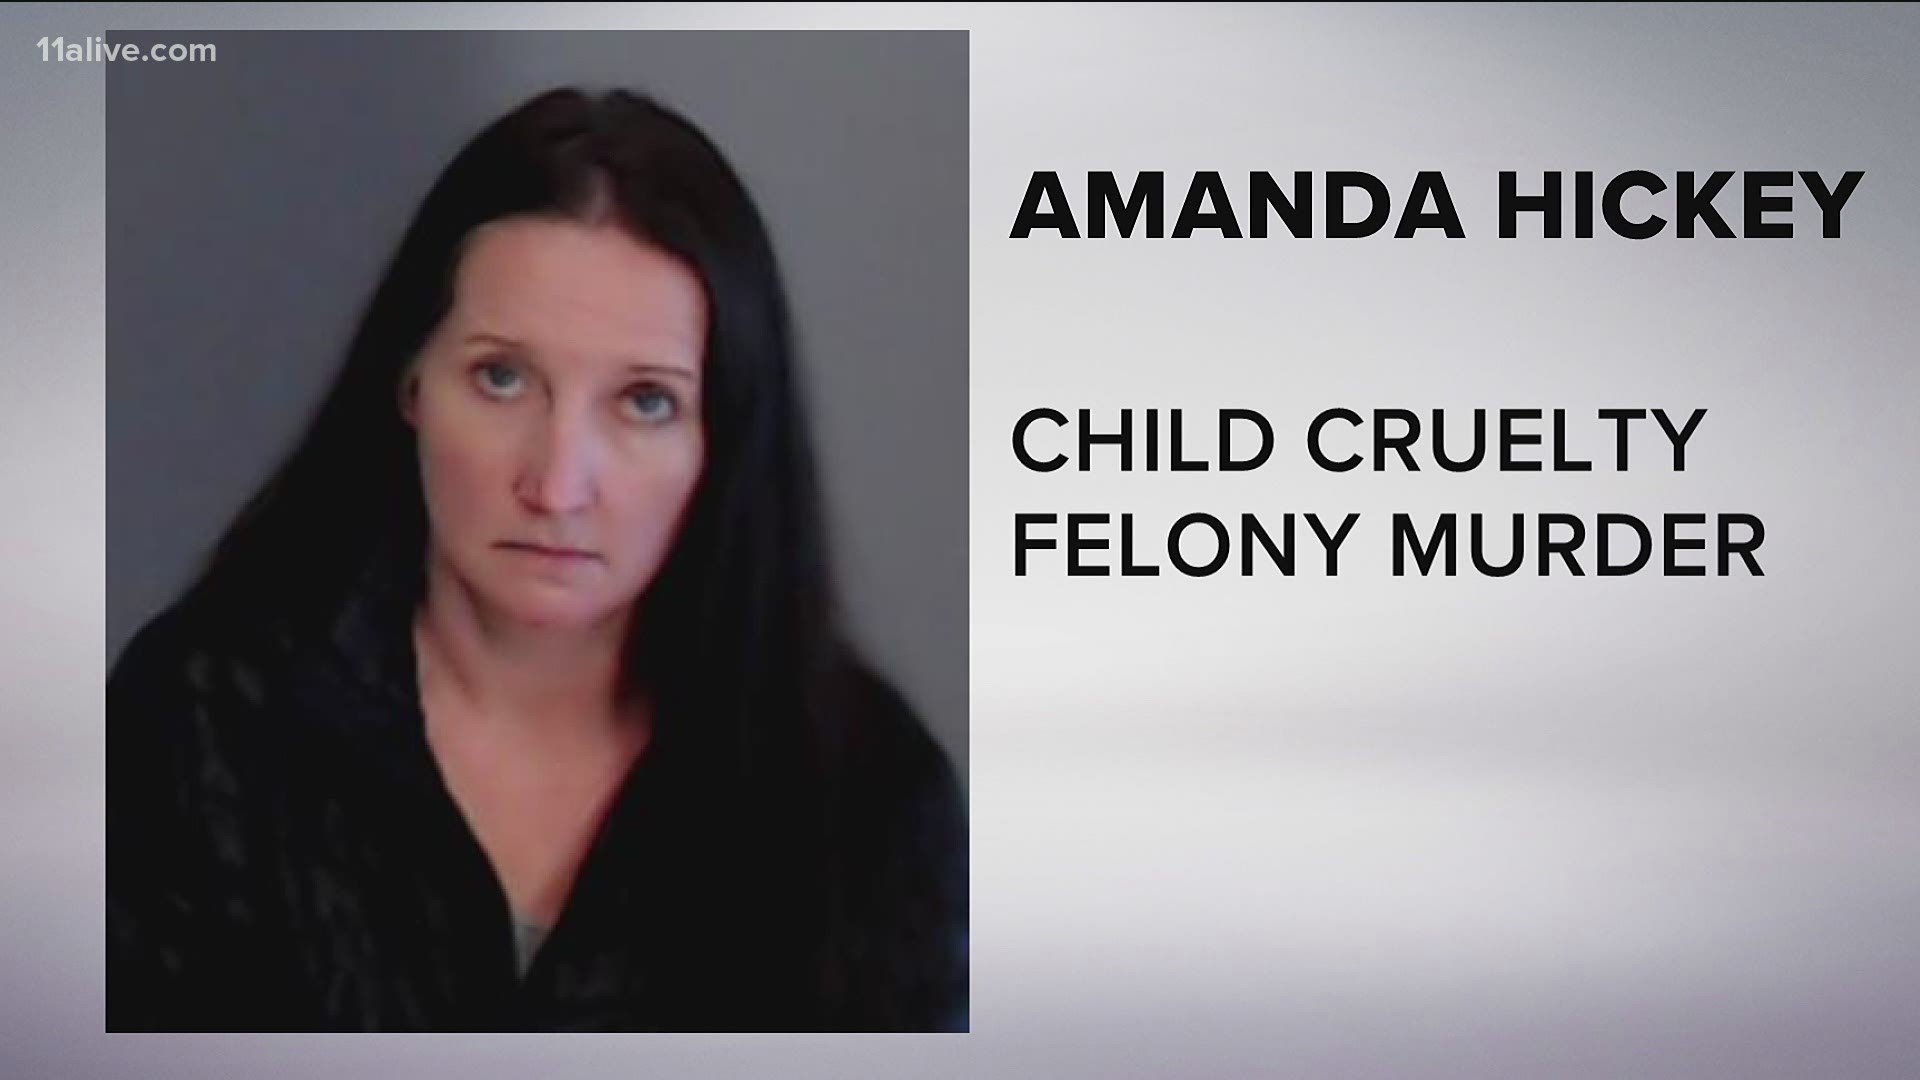 A Dunwoody daycare owner has been charged with murder in connection with the death of a 4-month-old baby.